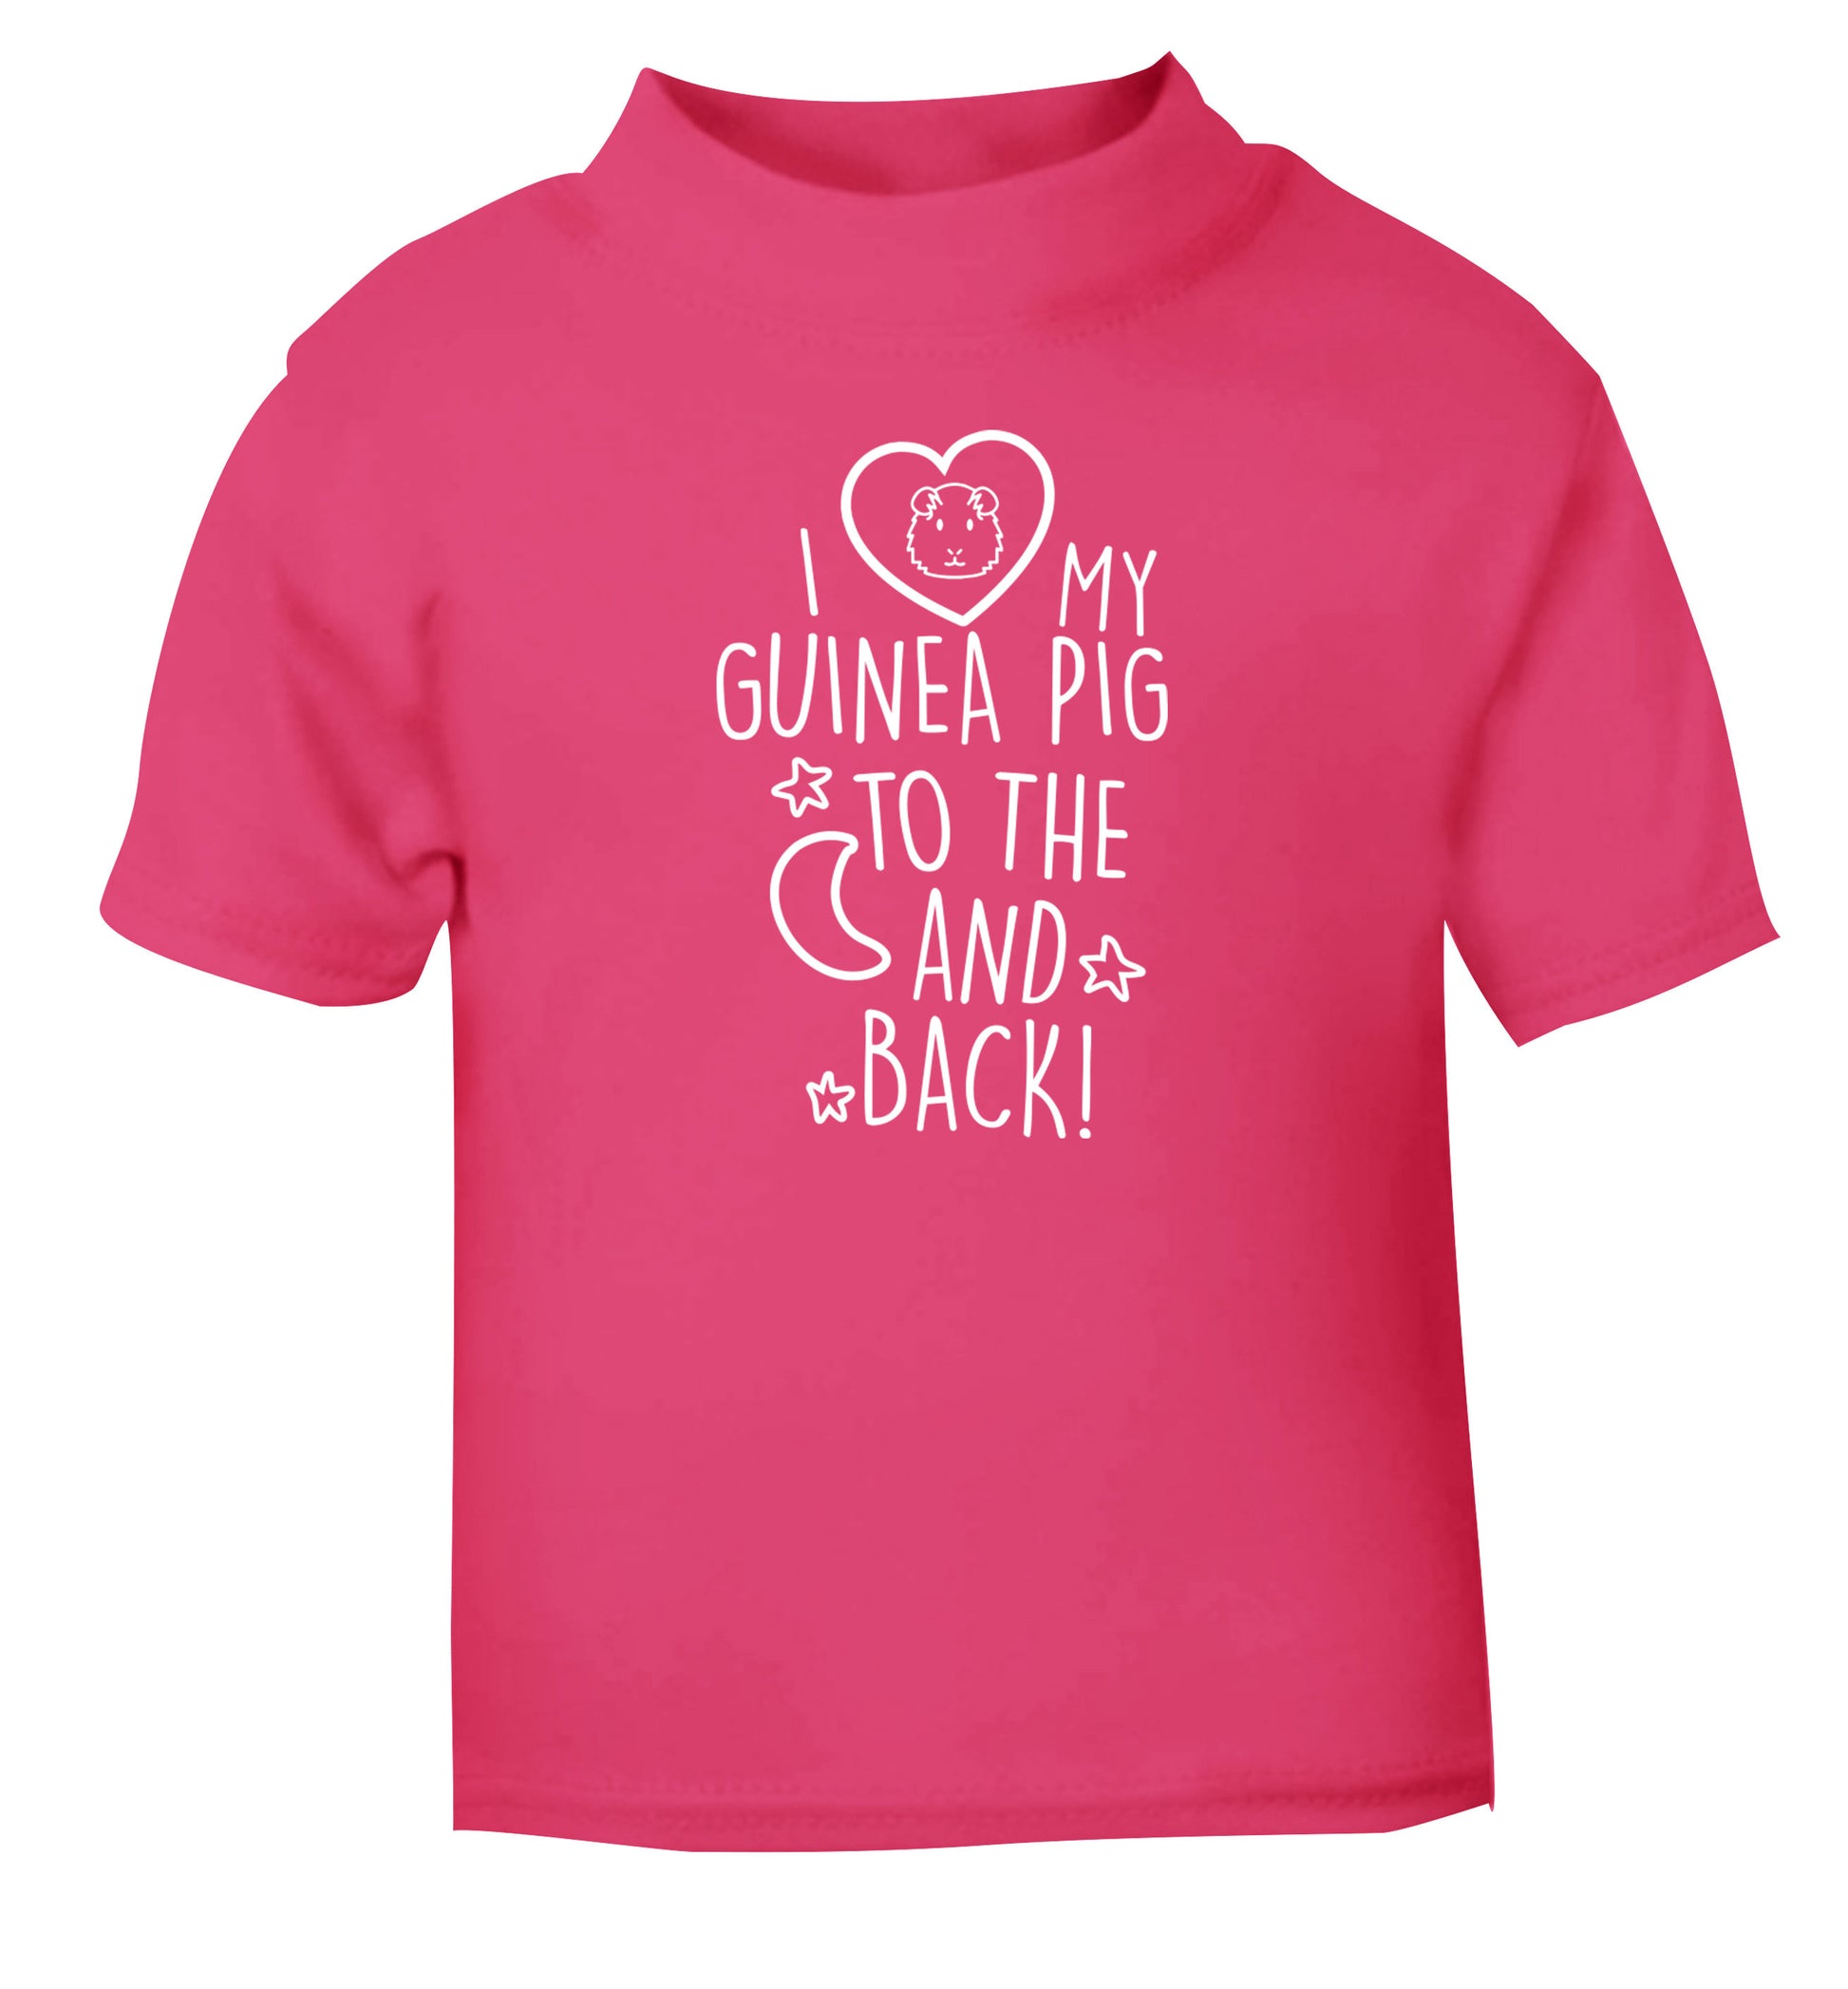 I love my guinea pig to the moon and back pink Baby Toddler Tshirt 2 Years